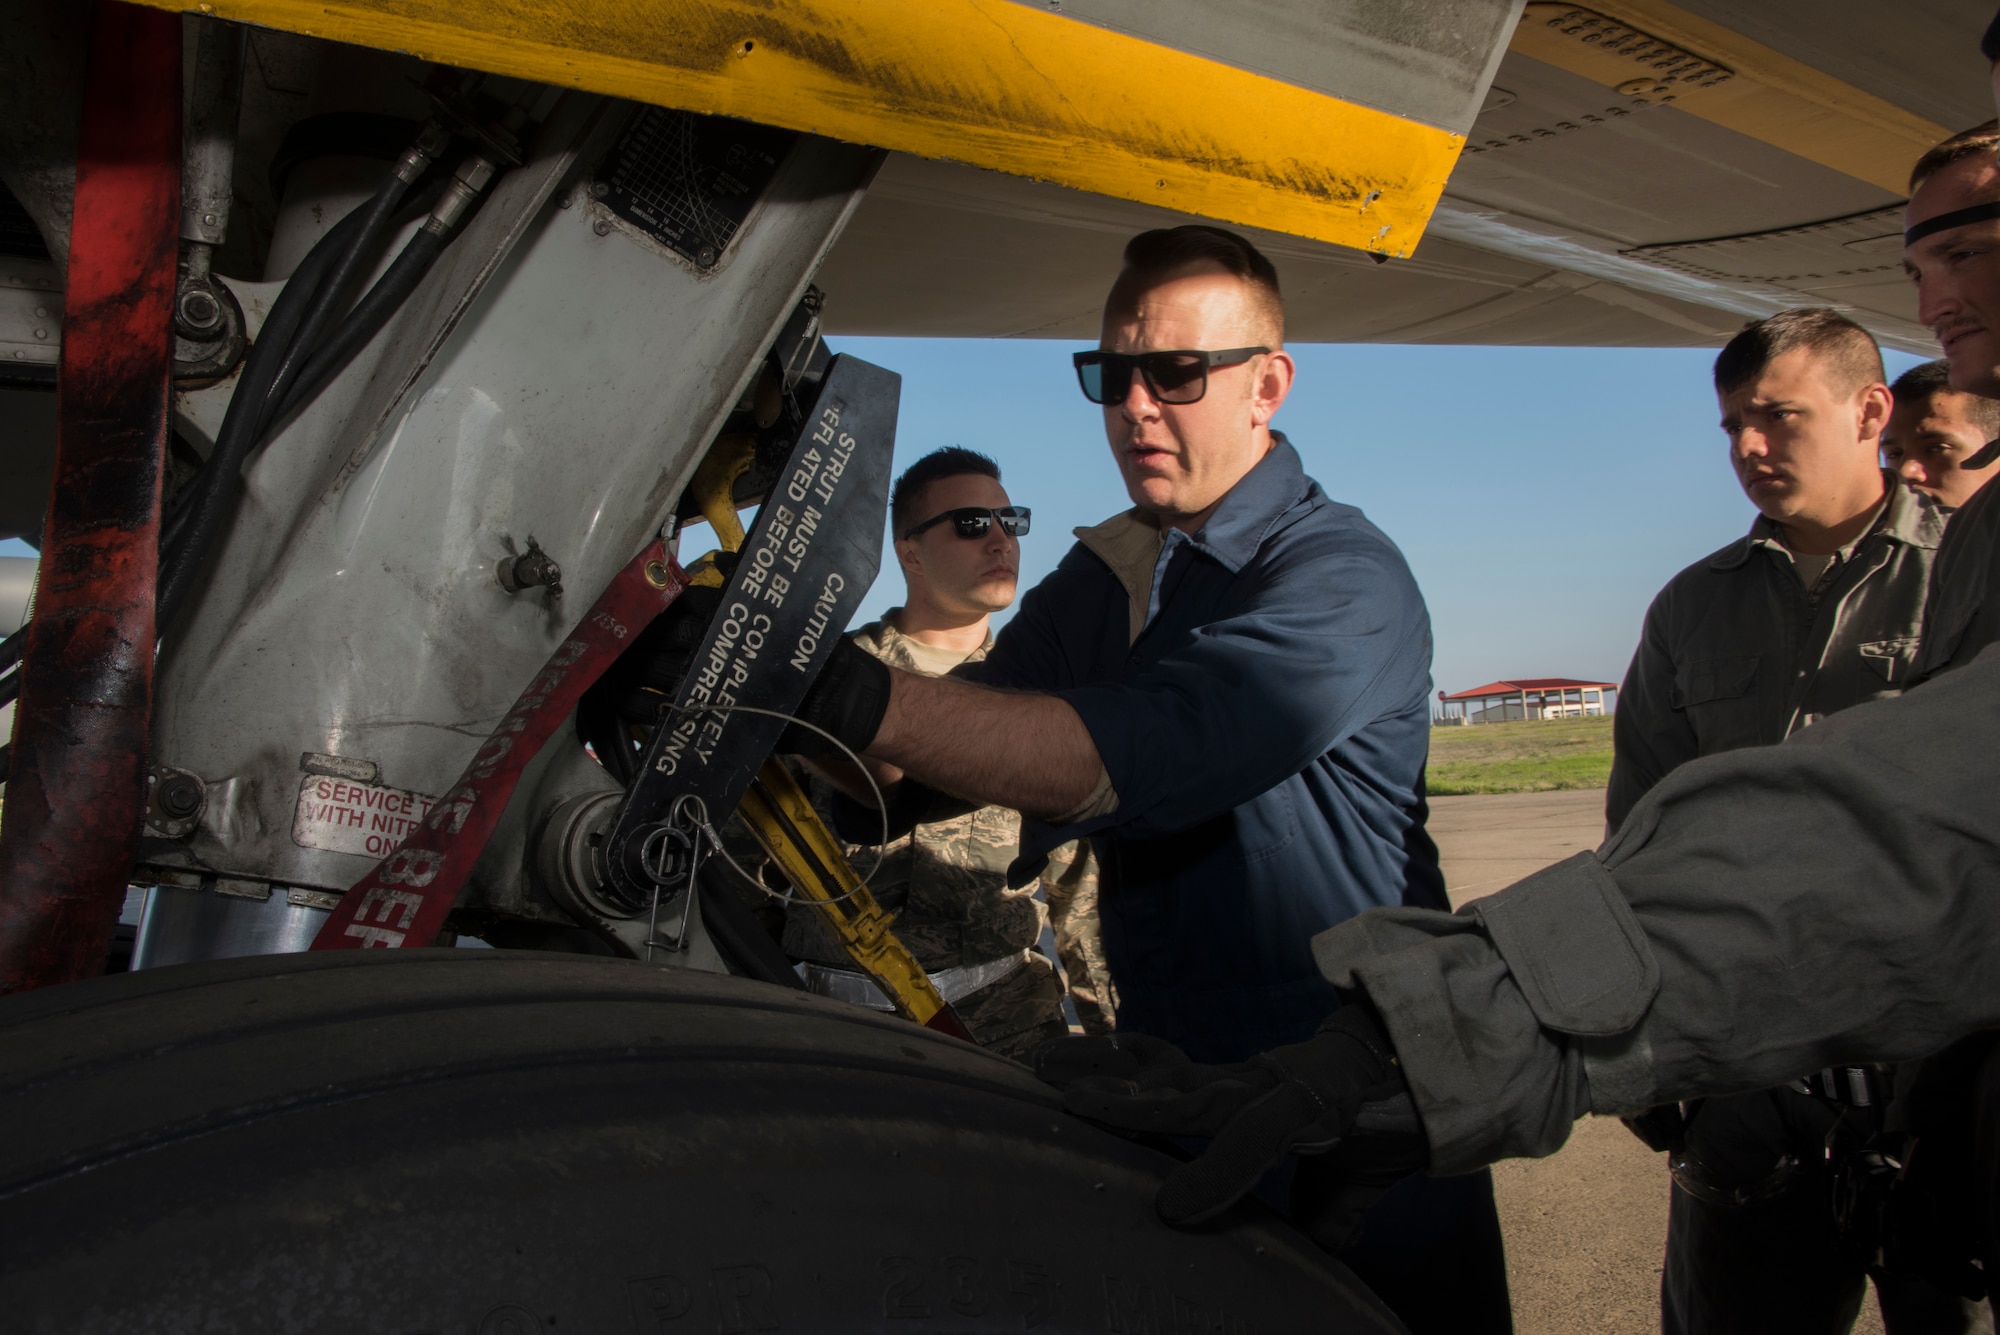 Tech. Sgt. Adam Branam, an instructor for the 373rd Training Squadron, Detachment 14 conducts a repair demonstration for a group of crew chief trainees on a KC-10 Extender wheel assembly, Feb. 7, 2018, Travis Air Force Base, Calif. The 373rd Training Squadron, Detachment 14, based out of Sheppard Air Force Base, Texas, trains crew chiefs, electricians, jet mechanics, avionics, air and ground equipment and hydraulics troops on aircraft maintenance and repair. (U.S. Air Force Photo by Heide Couch)